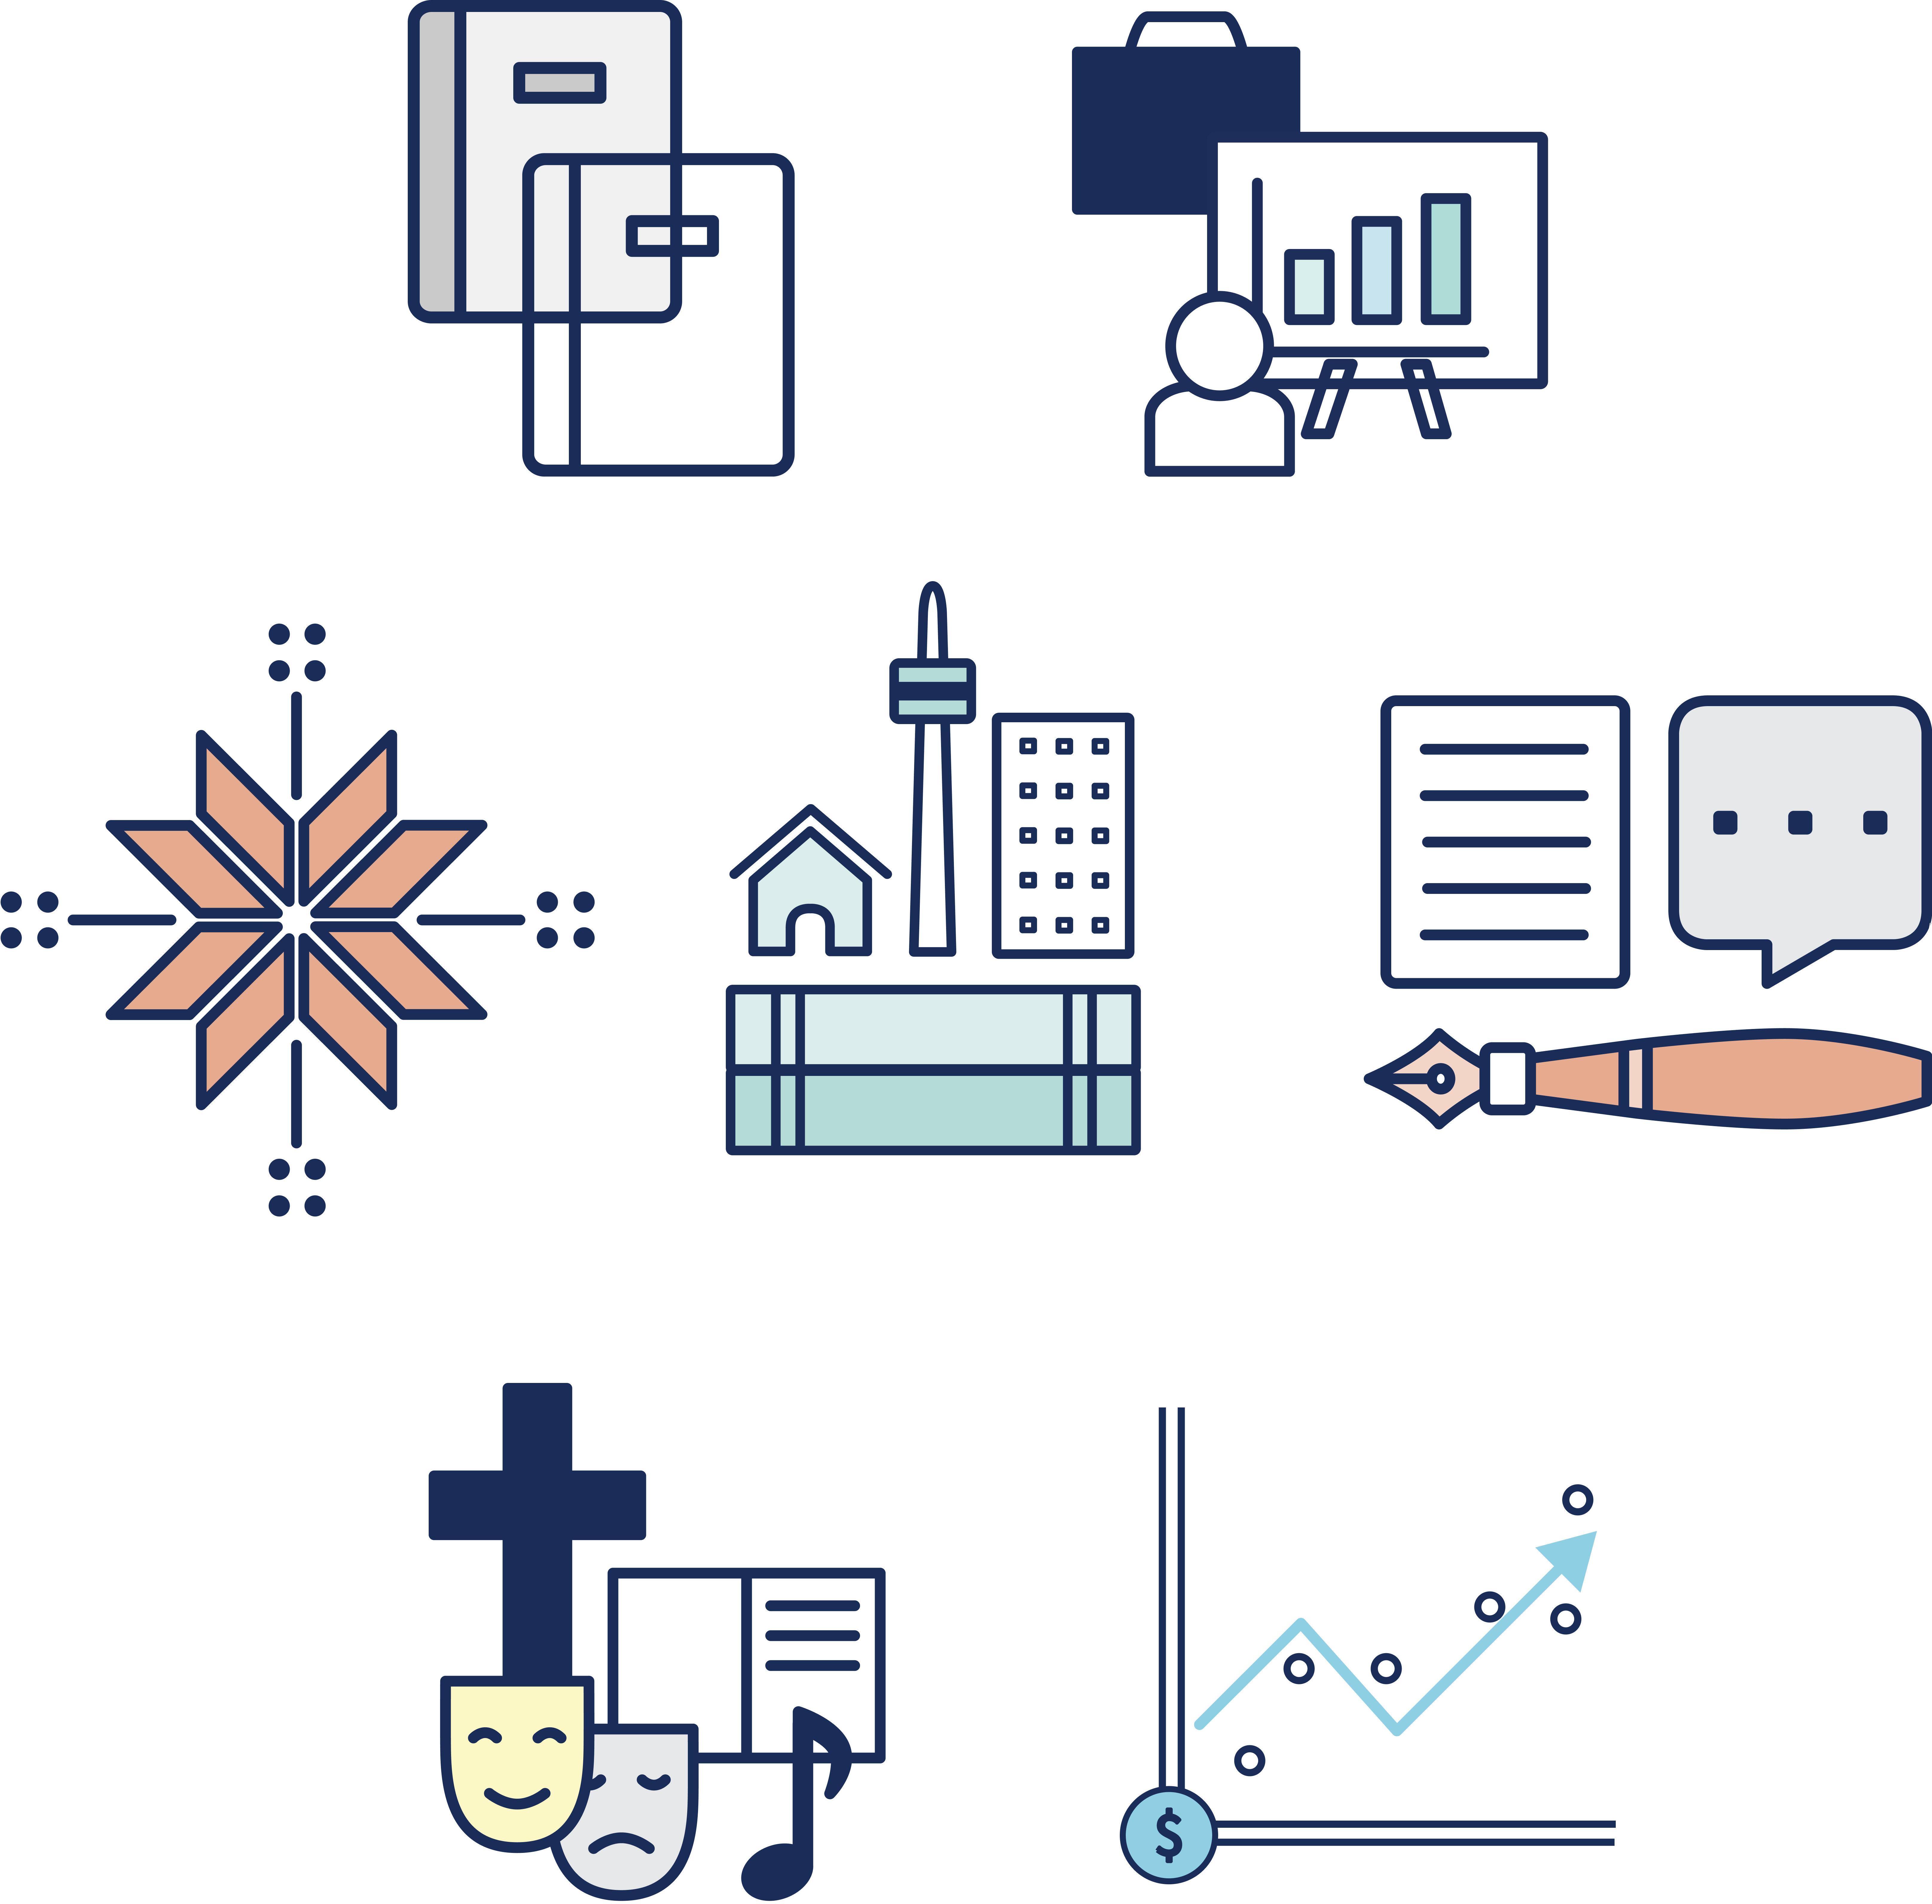 A series of icons representing departments in Arts Science, such as books, graph, drama masks, music notes, and more.